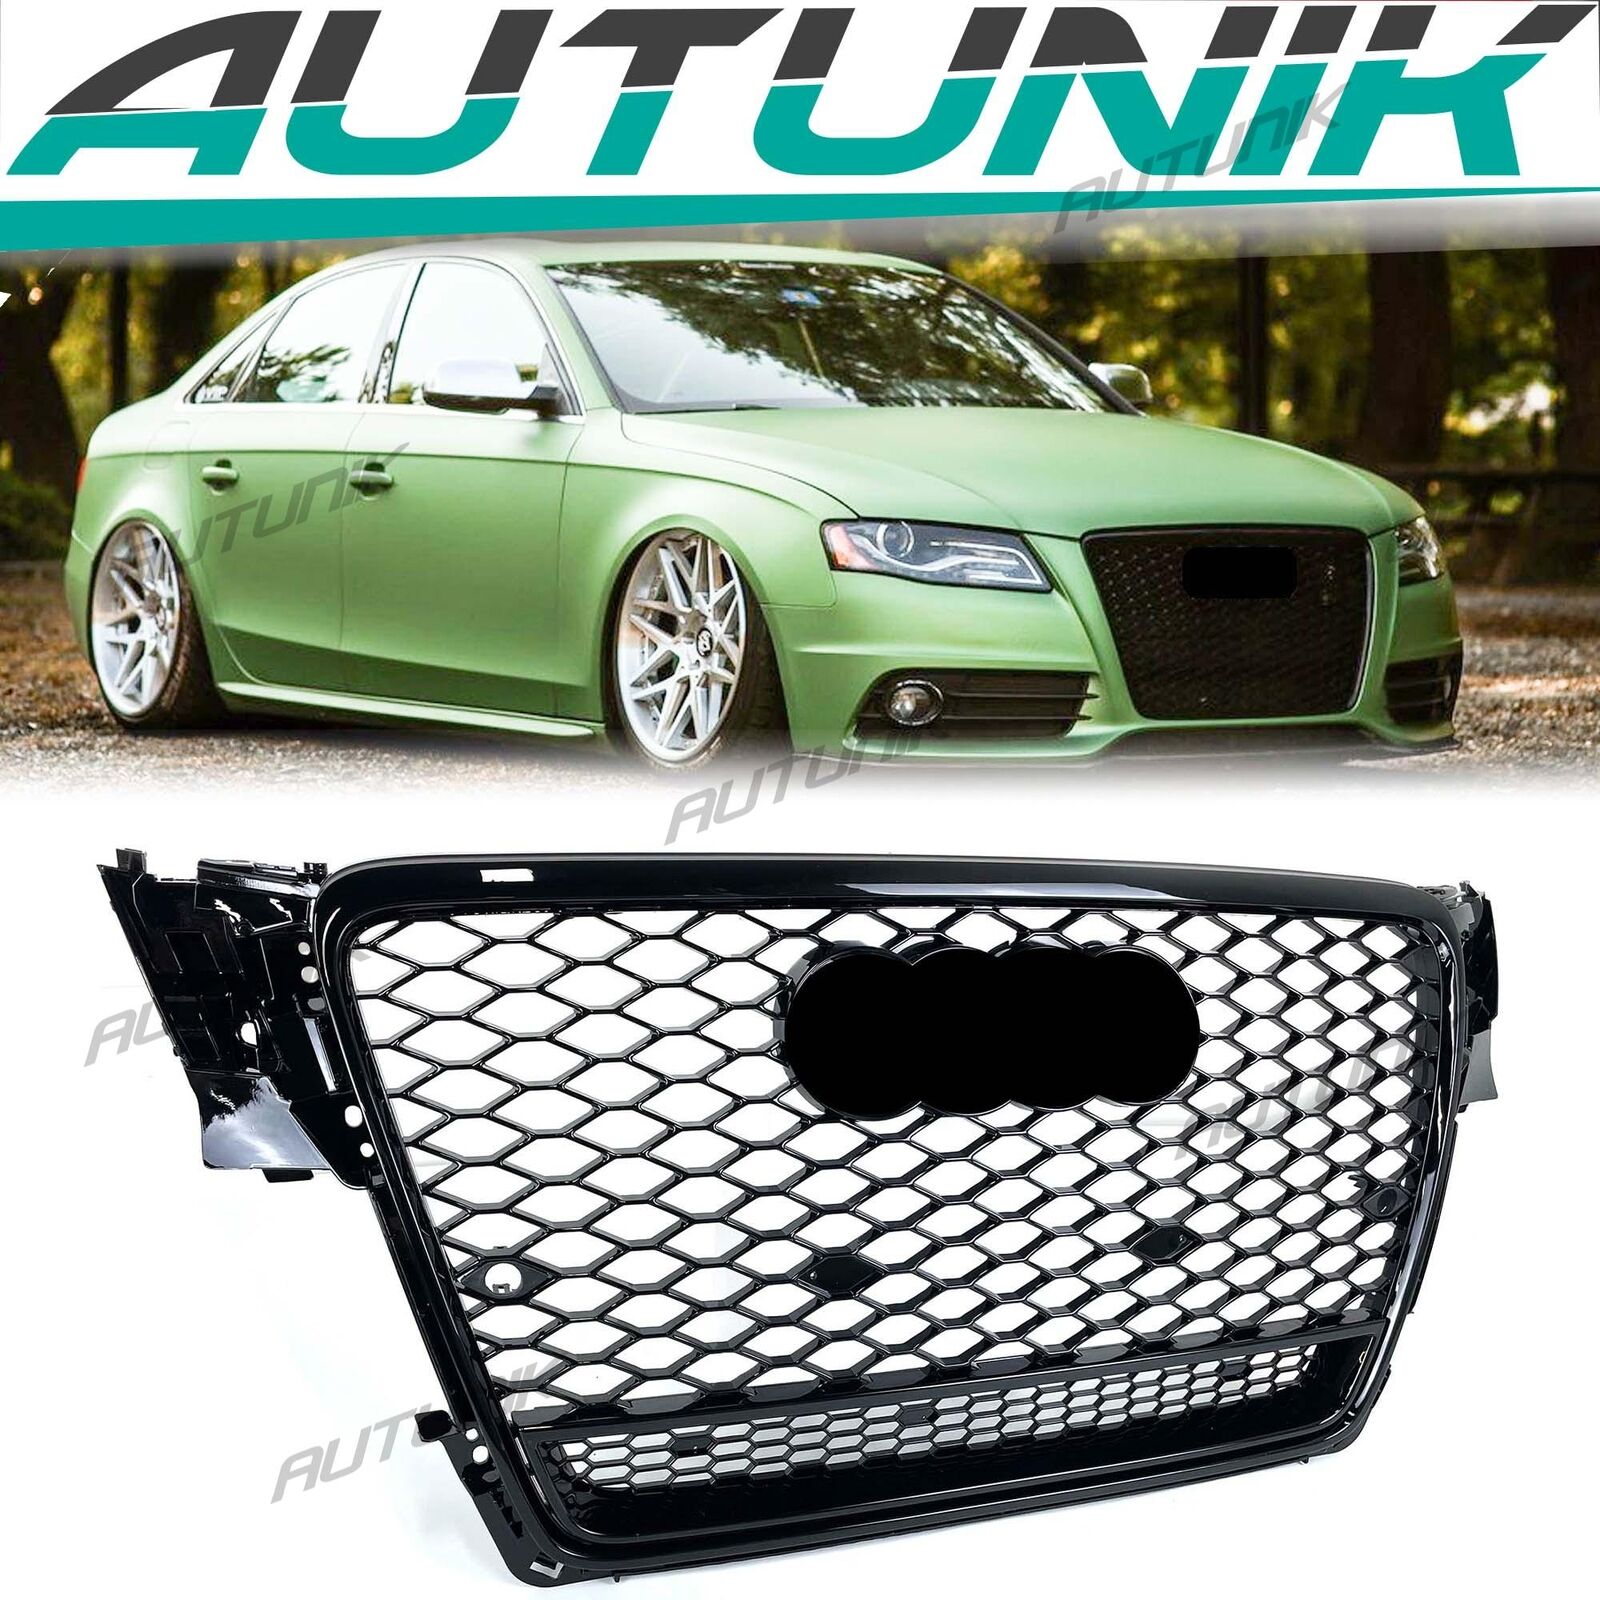 Honeycomb RS4 Front Black Grill Mesh Grille for Audi A4 B8 S4 2009-2011 2012